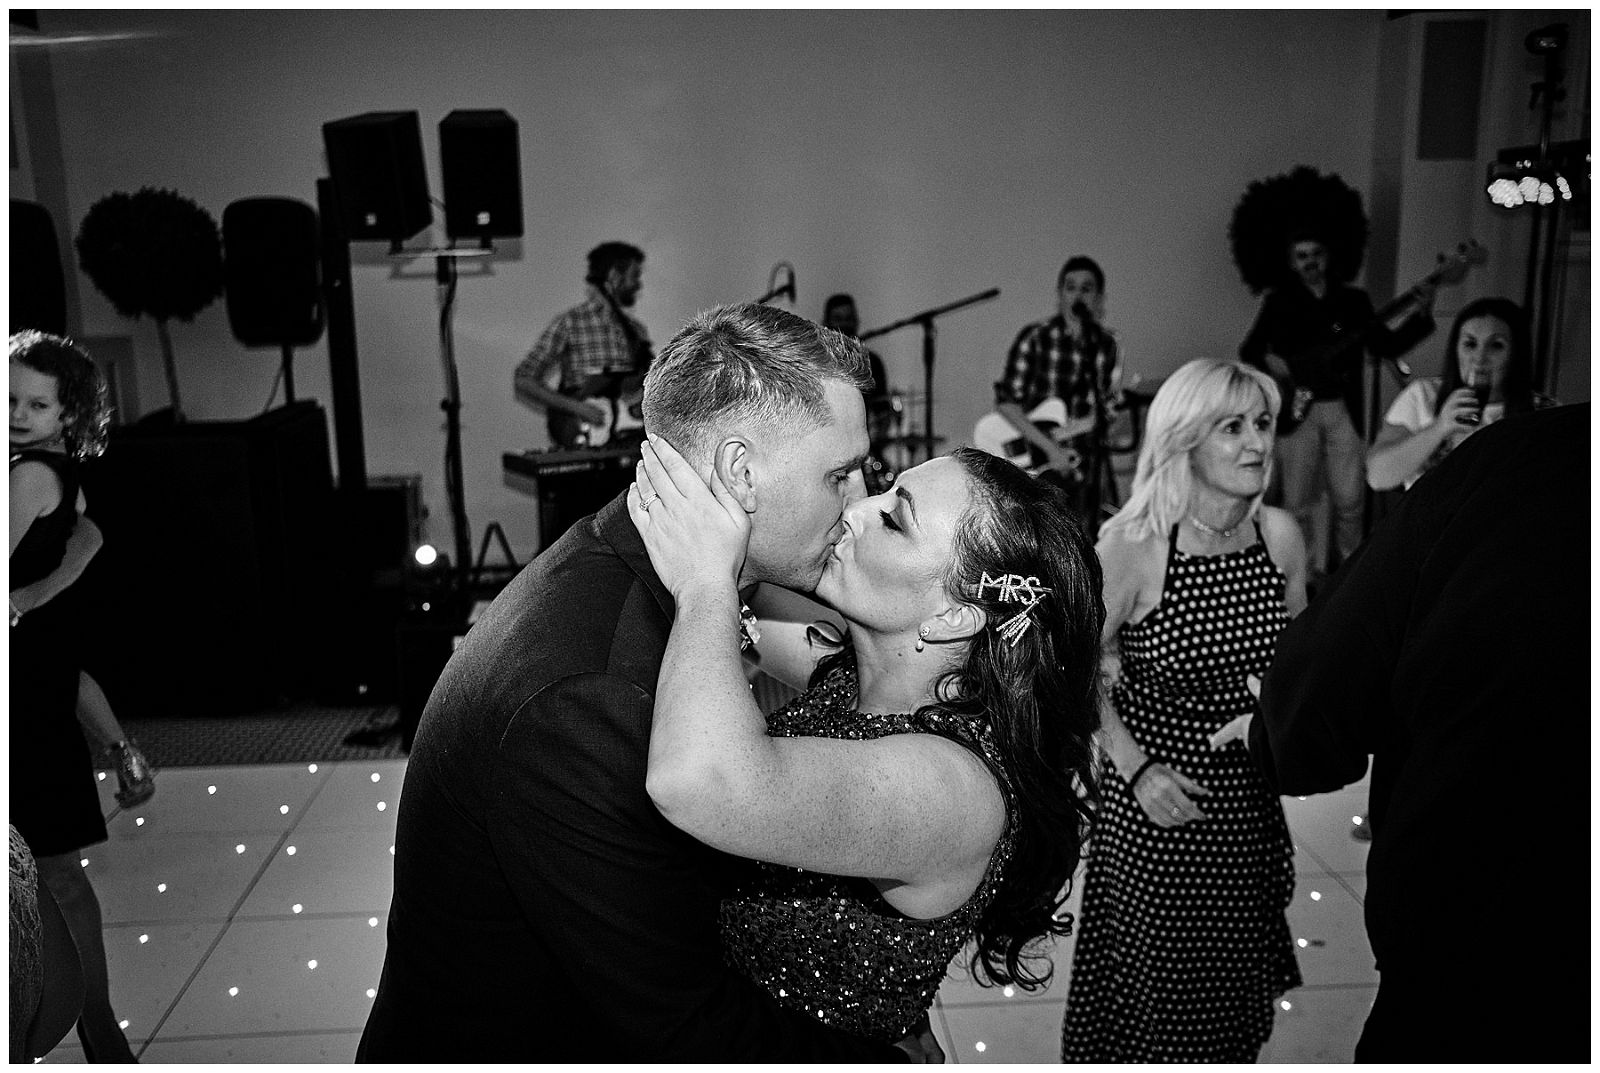 Early evening fun on the dance floor with the House of Chords wedding band providing great entertainment at Hawkstone Hall in Shrewsbury by Documentary Wedding Photographer Stuart James